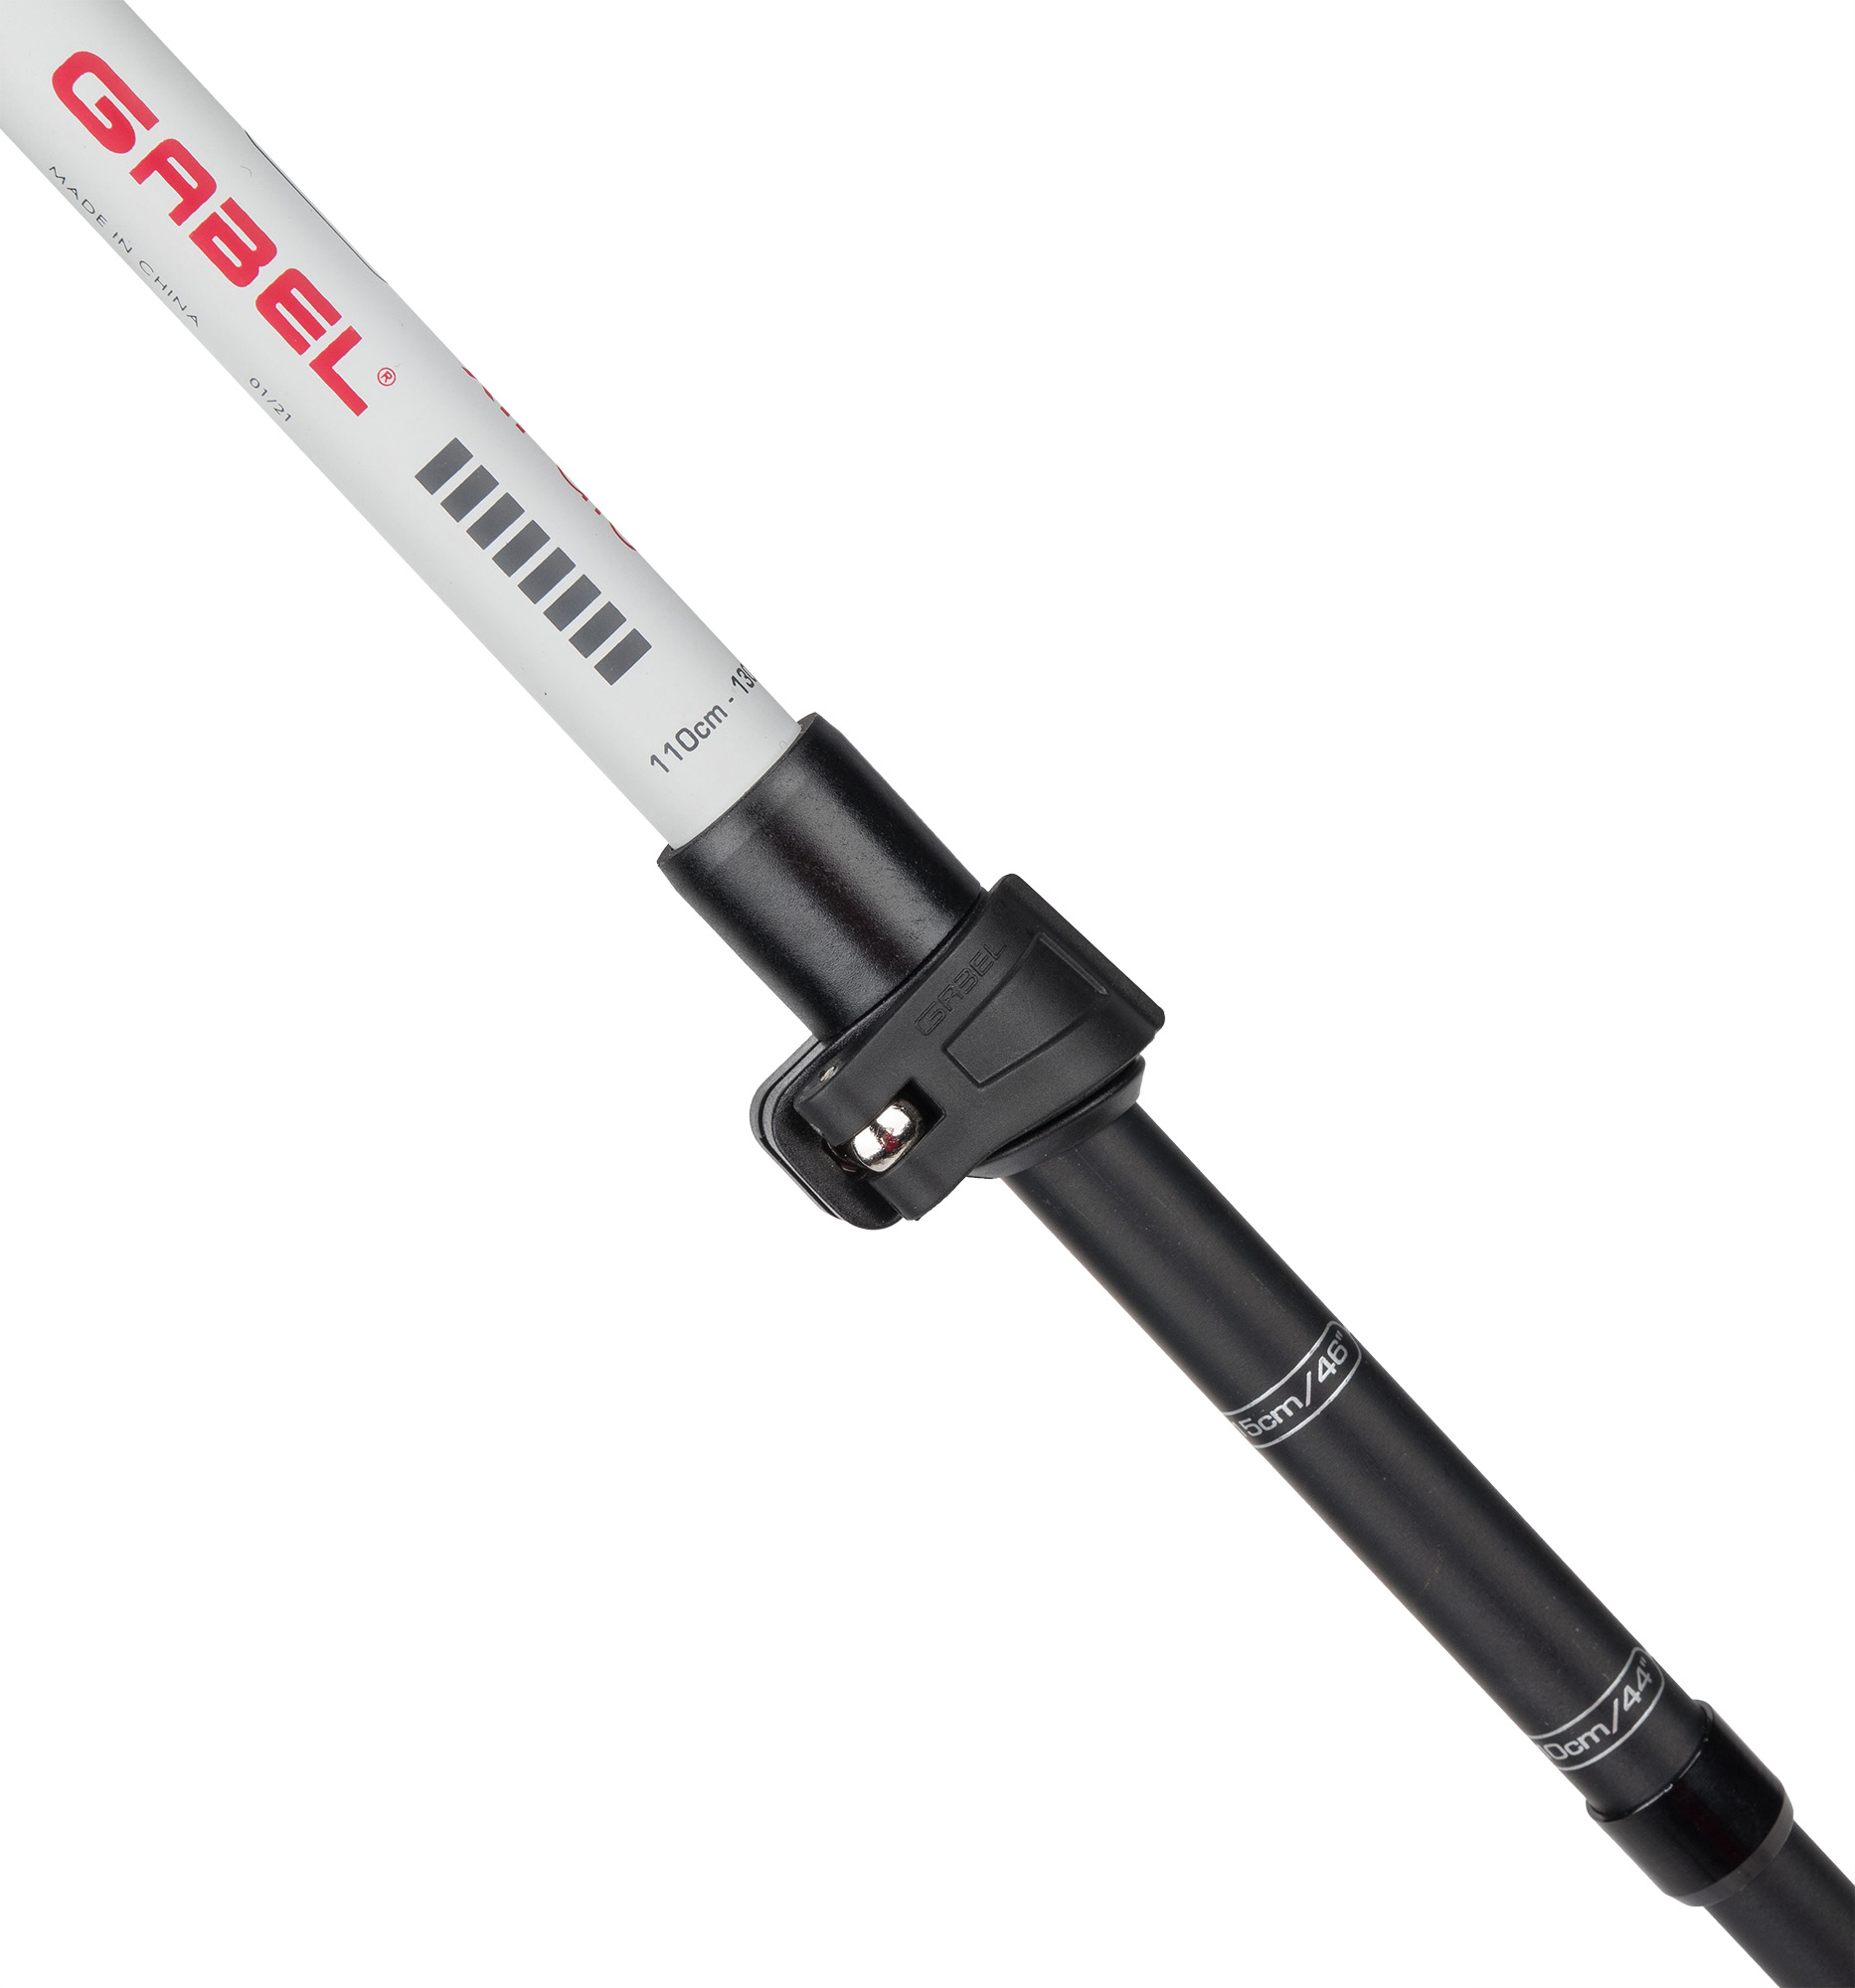 Collapsible trekking and ski touring poles